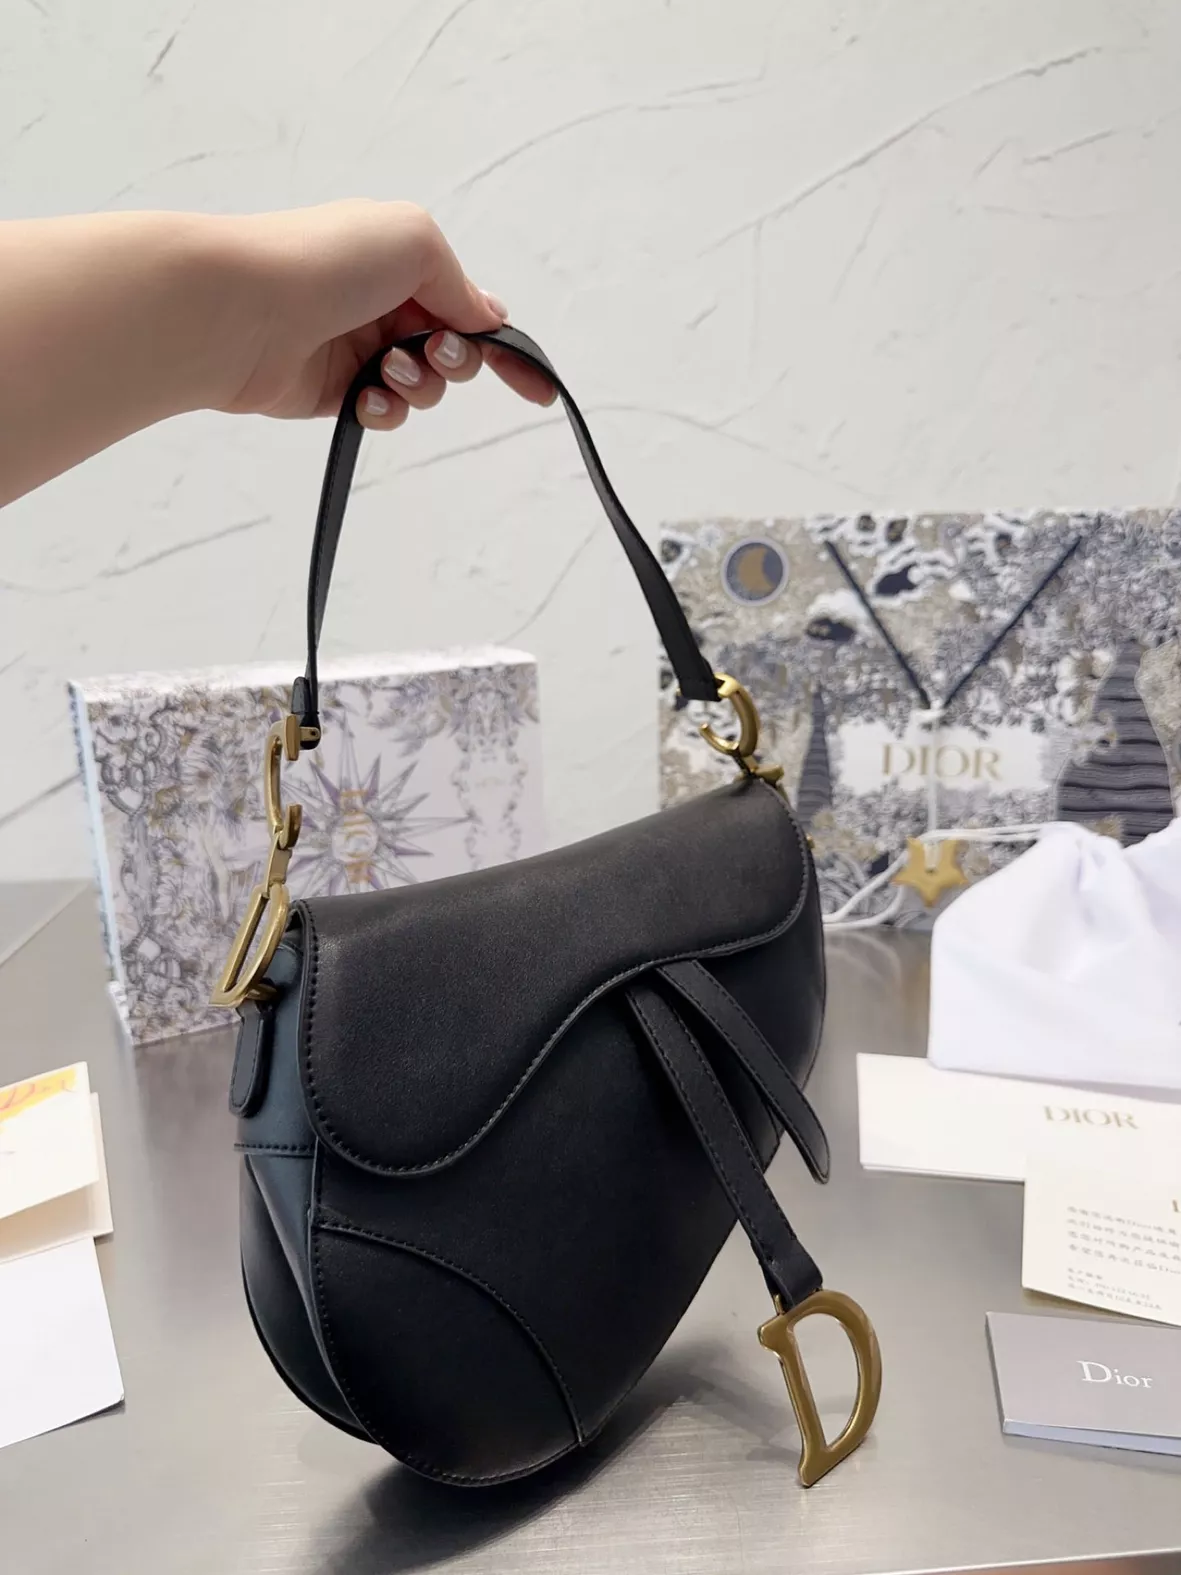 dior backpack from dhgate｜TikTok Search